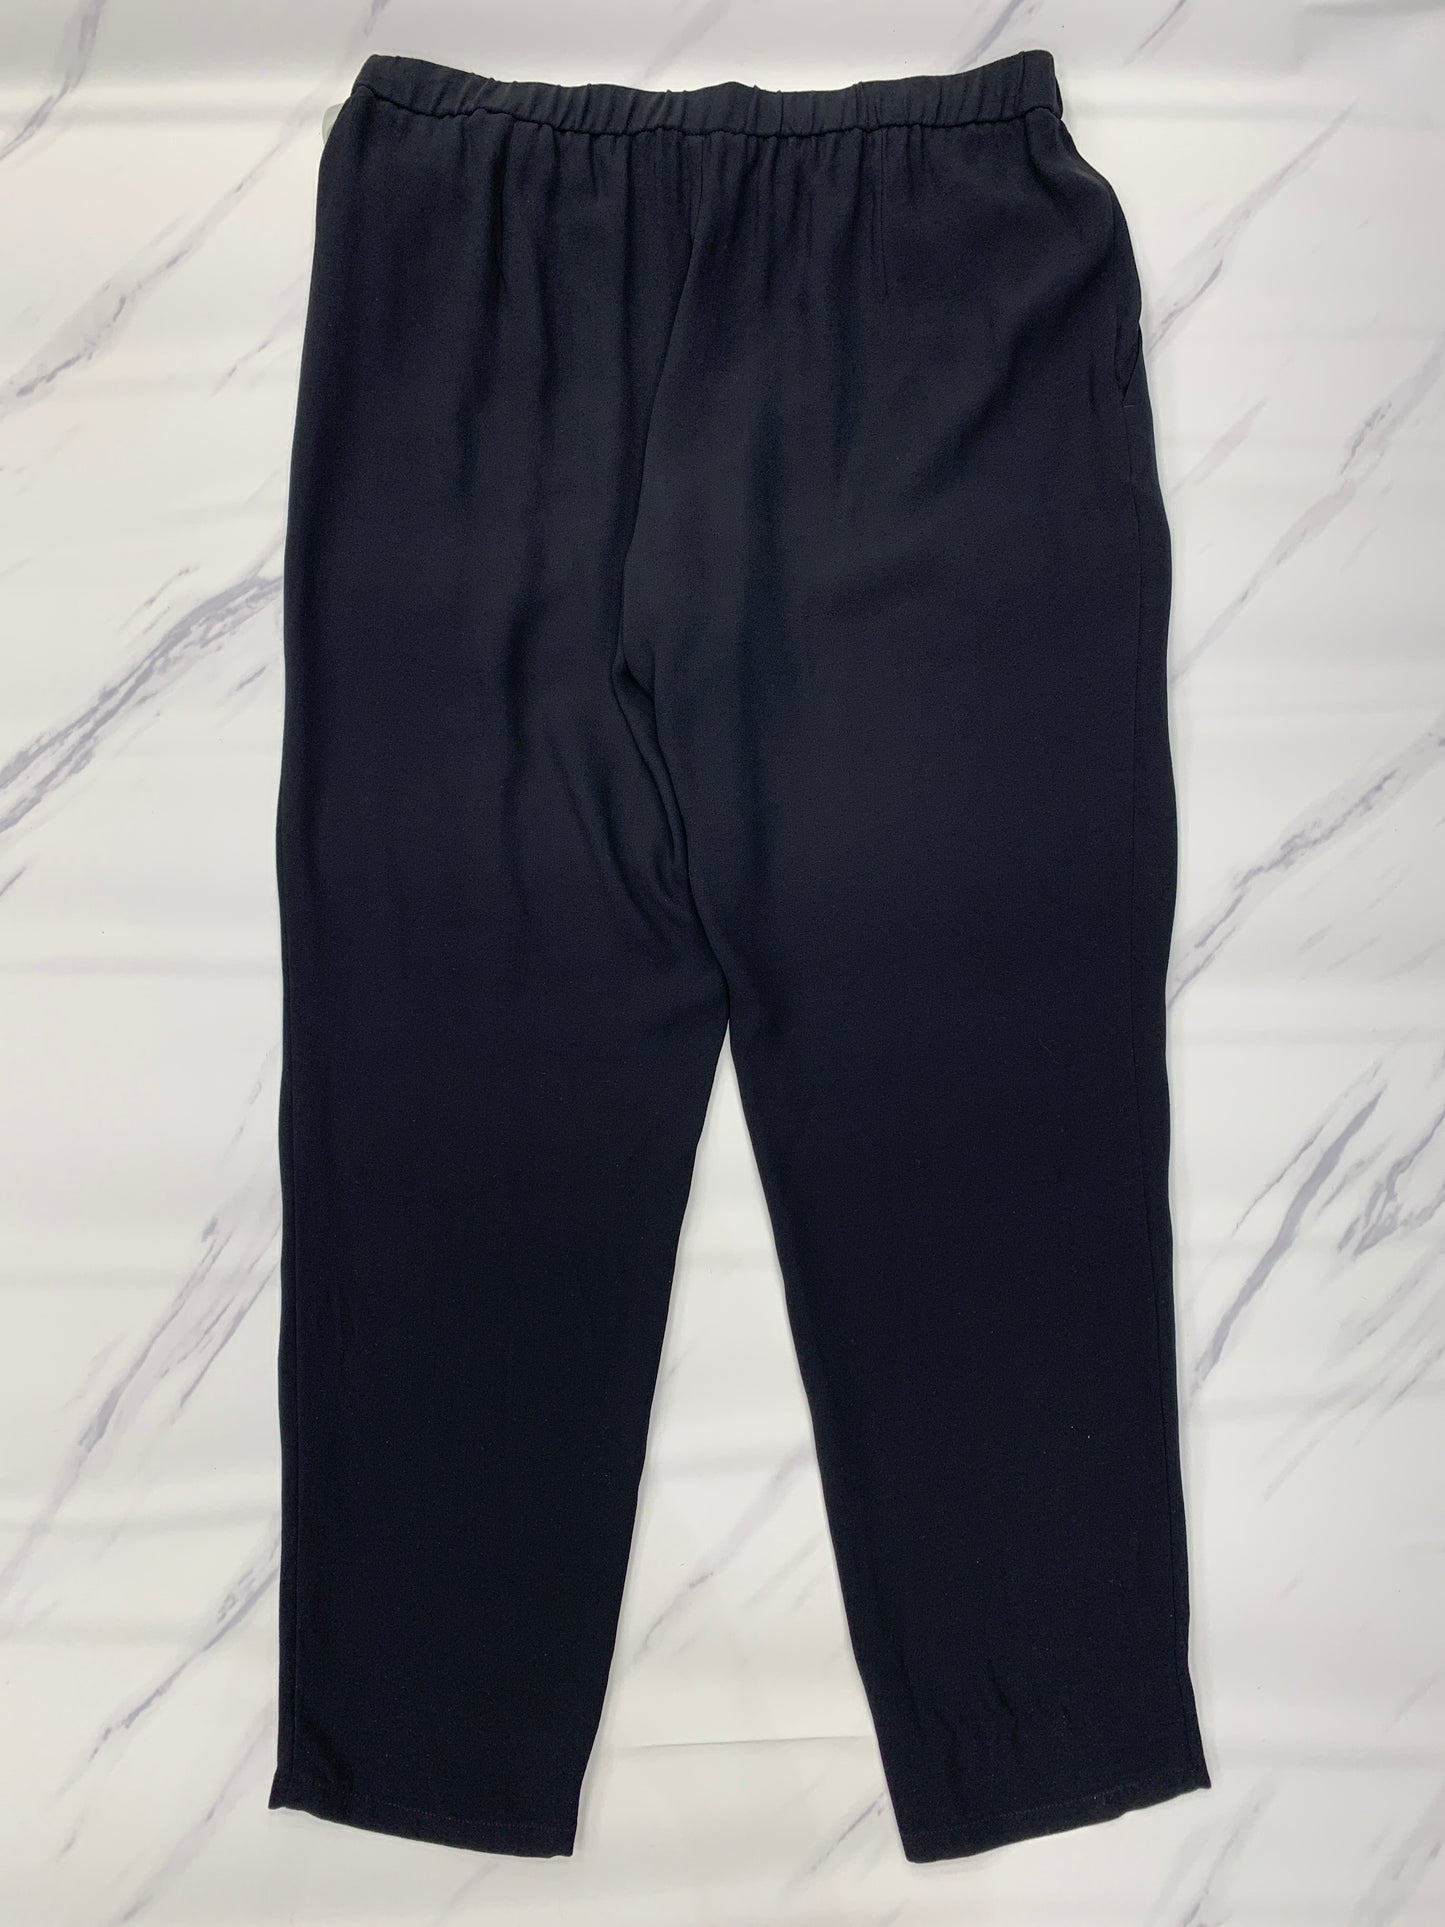 Pants Lounge By Eileen Fisher  Size: Petite  Medium